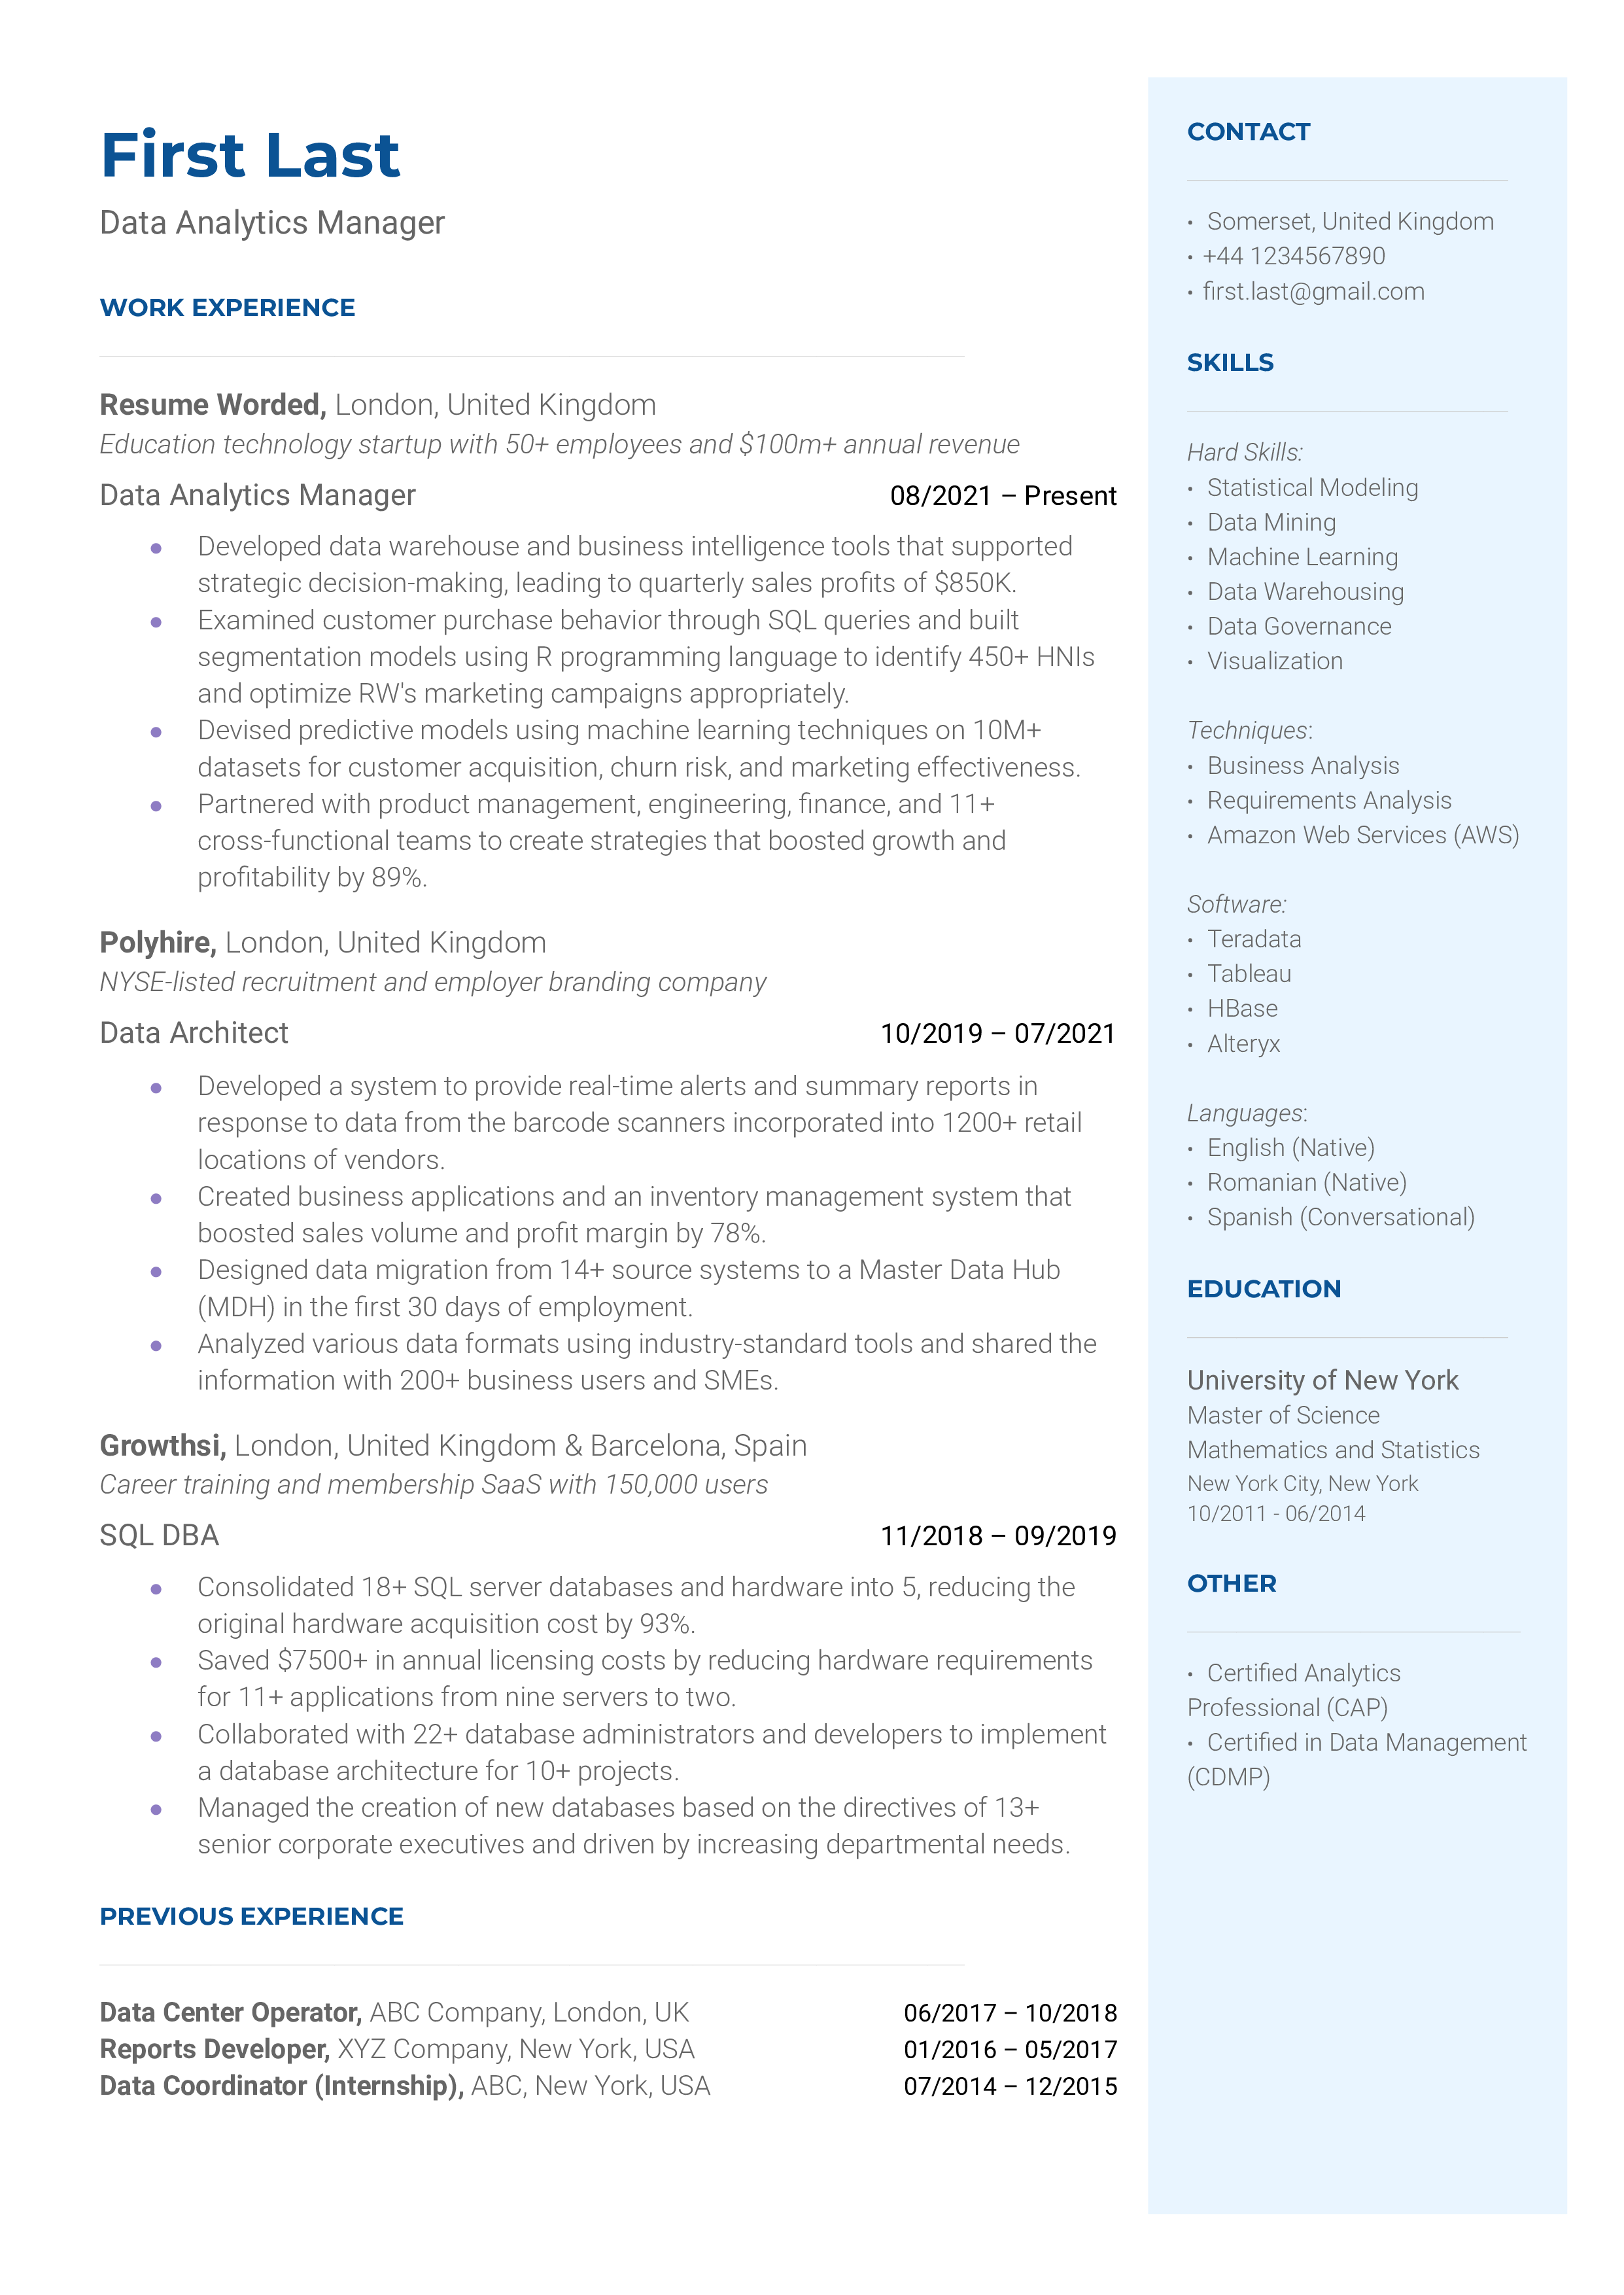 A data analytics manager resume template tailored to the IT industry.